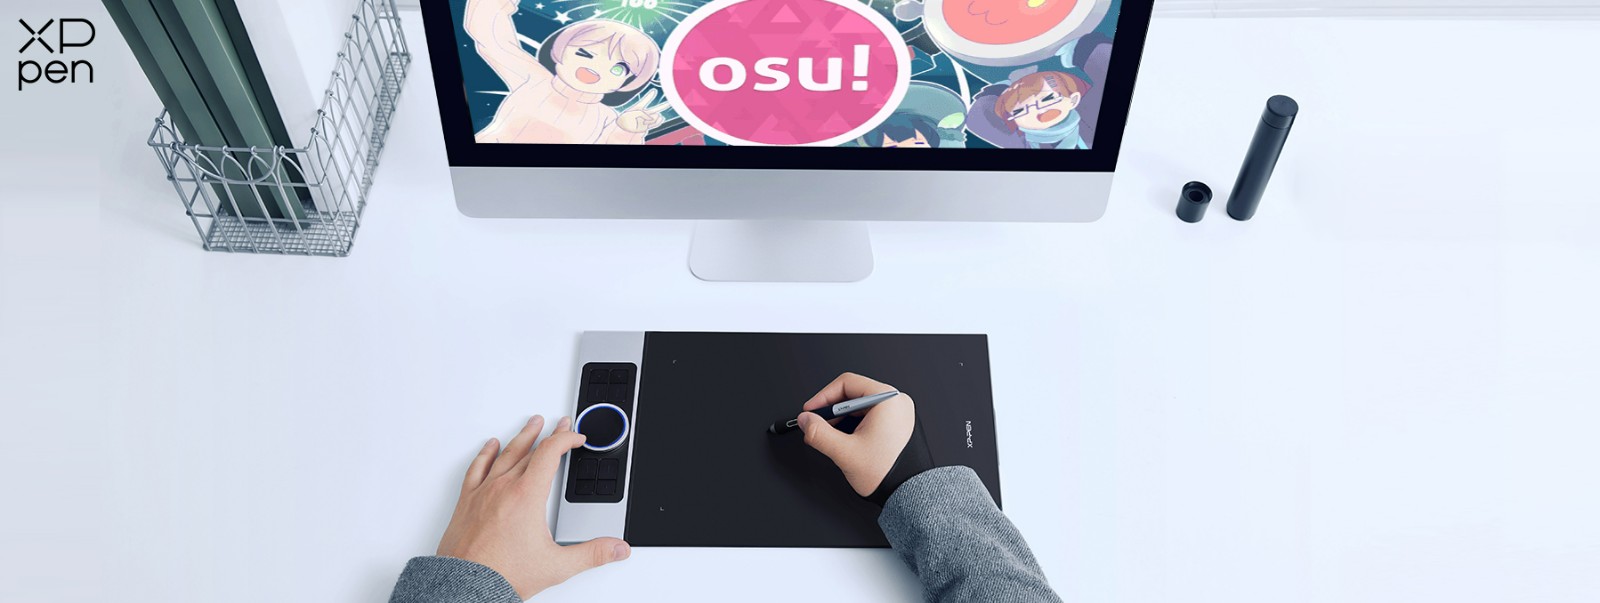 play-osu-with-xppen-drawing-tablet